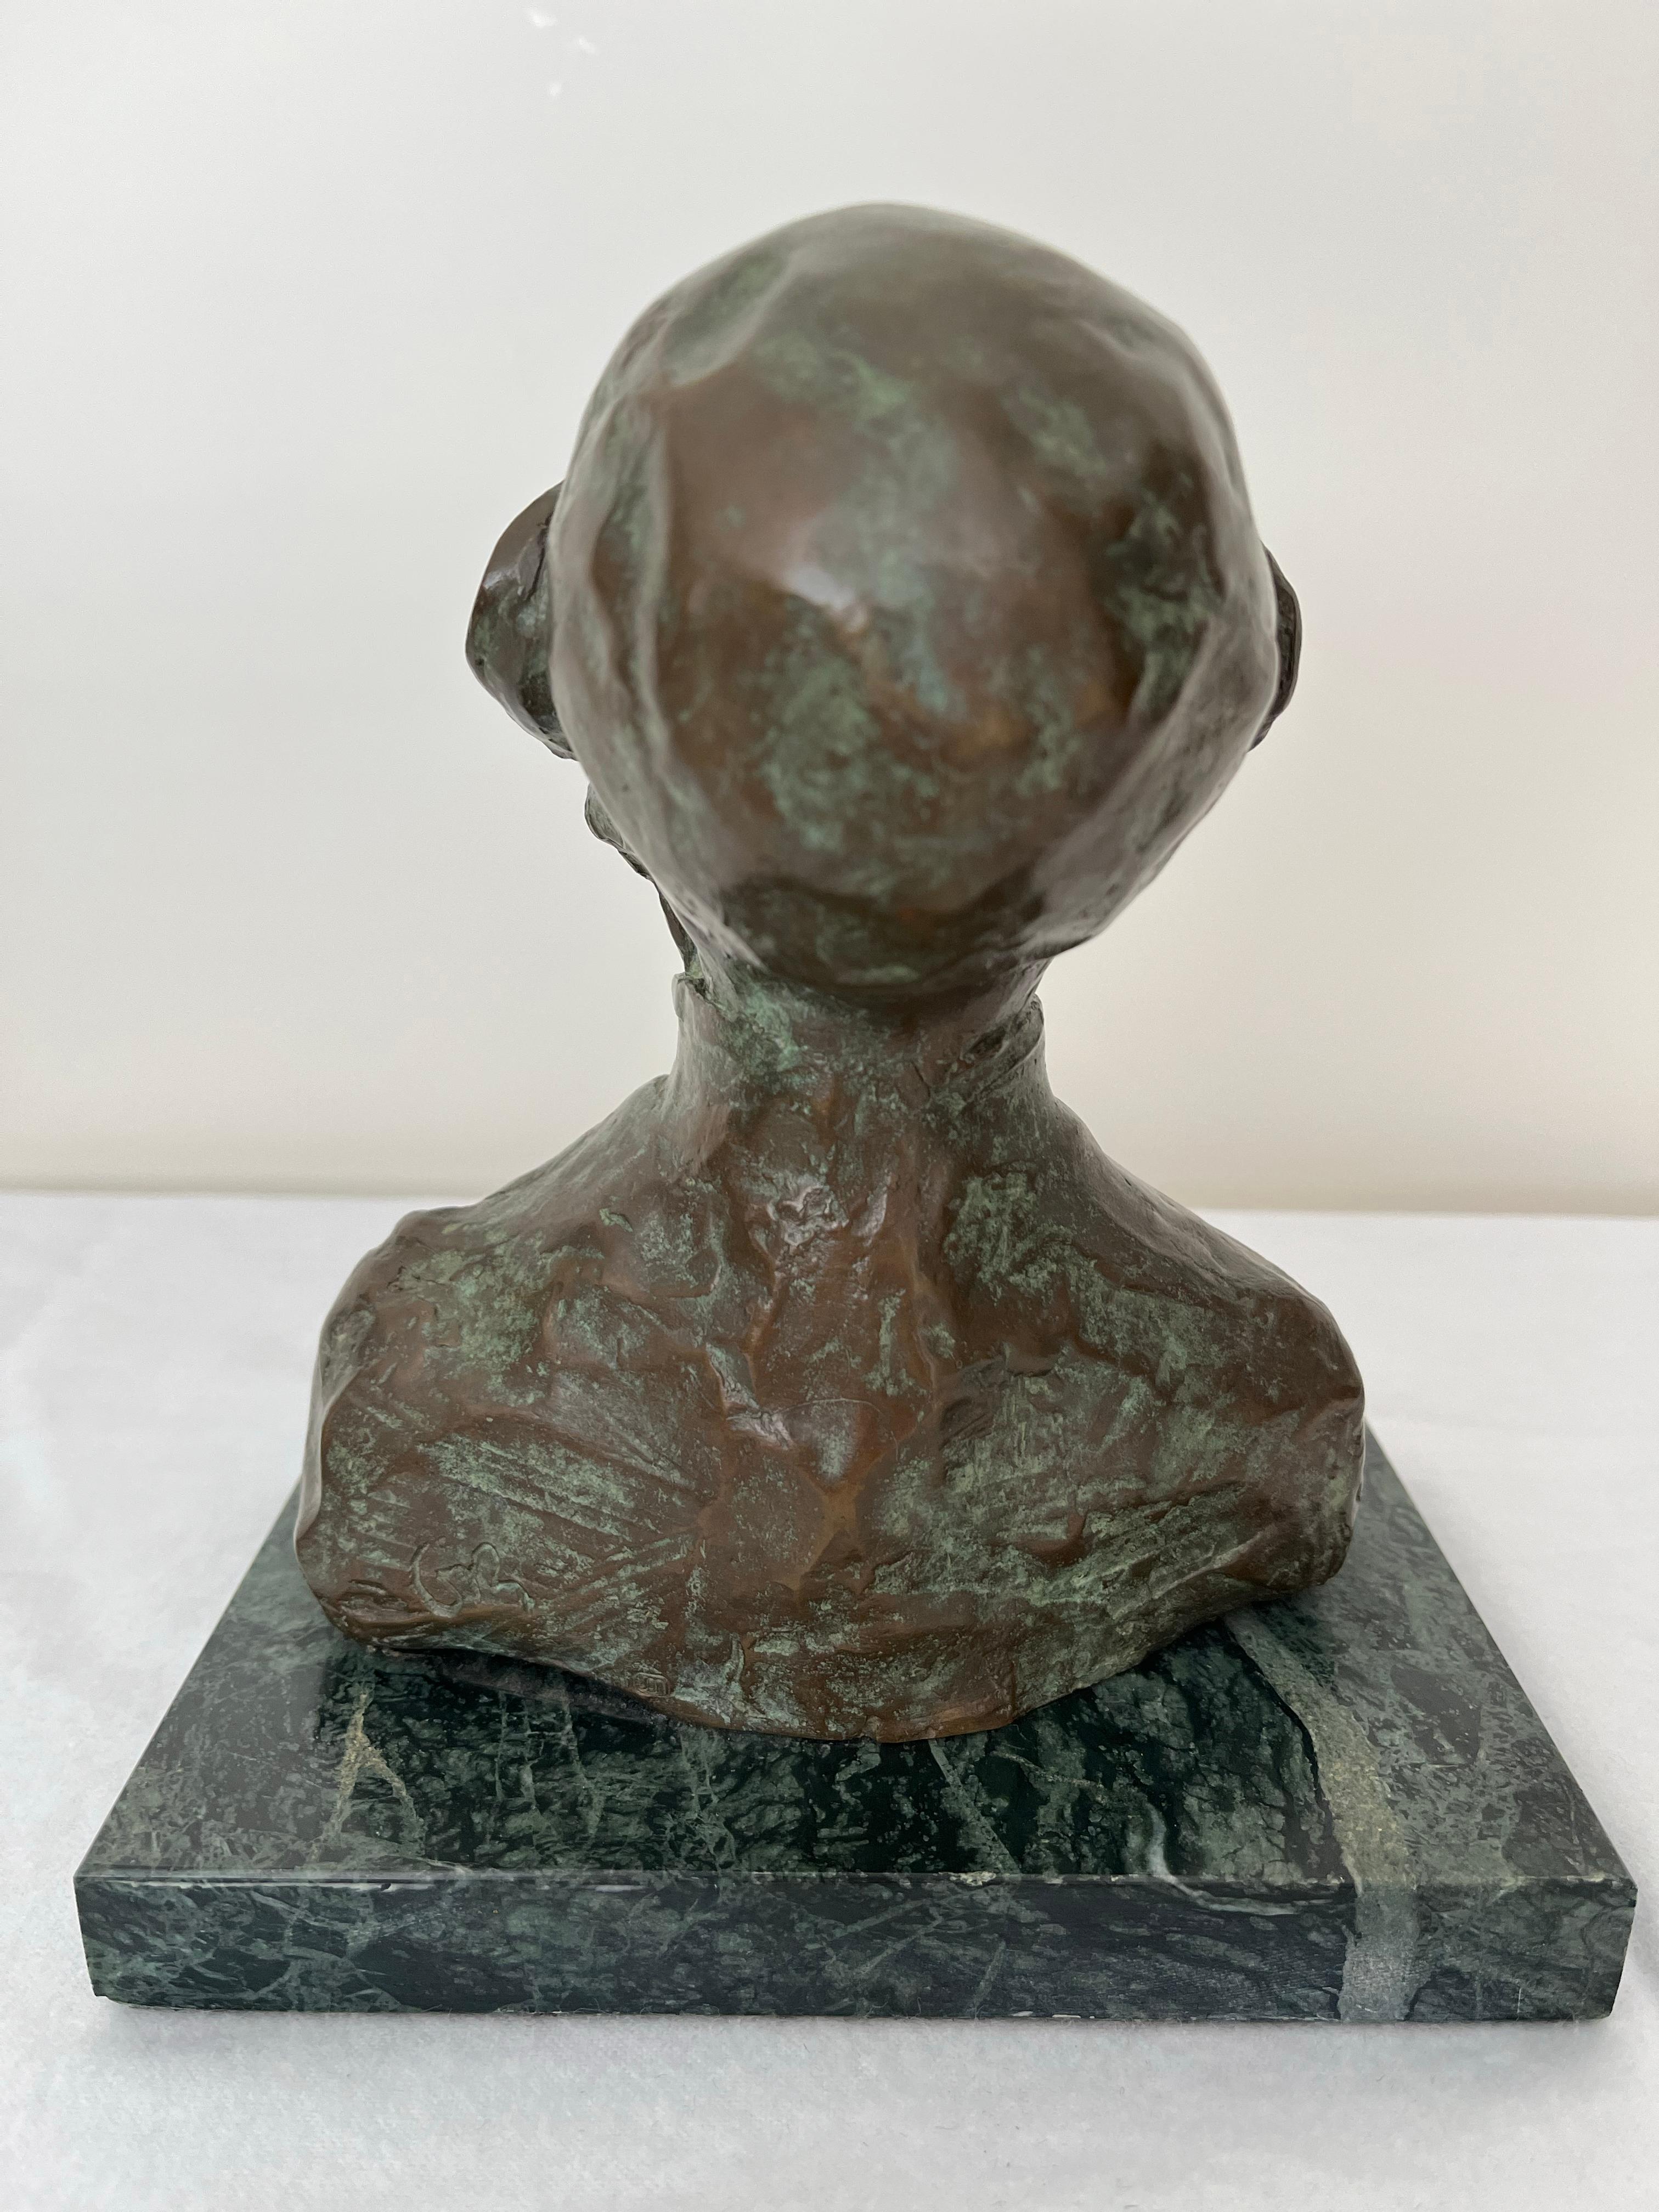 Orator Mid 20th Century Social Realism Modern Politics American Scene Sculpture. The actual dimensions are. 6 3/4 w x 4 3/4 d x 8 tall inches on a marble base. Signed on the base.

Provenance: Estate of the artist.

BIO
William Gropper (1897-